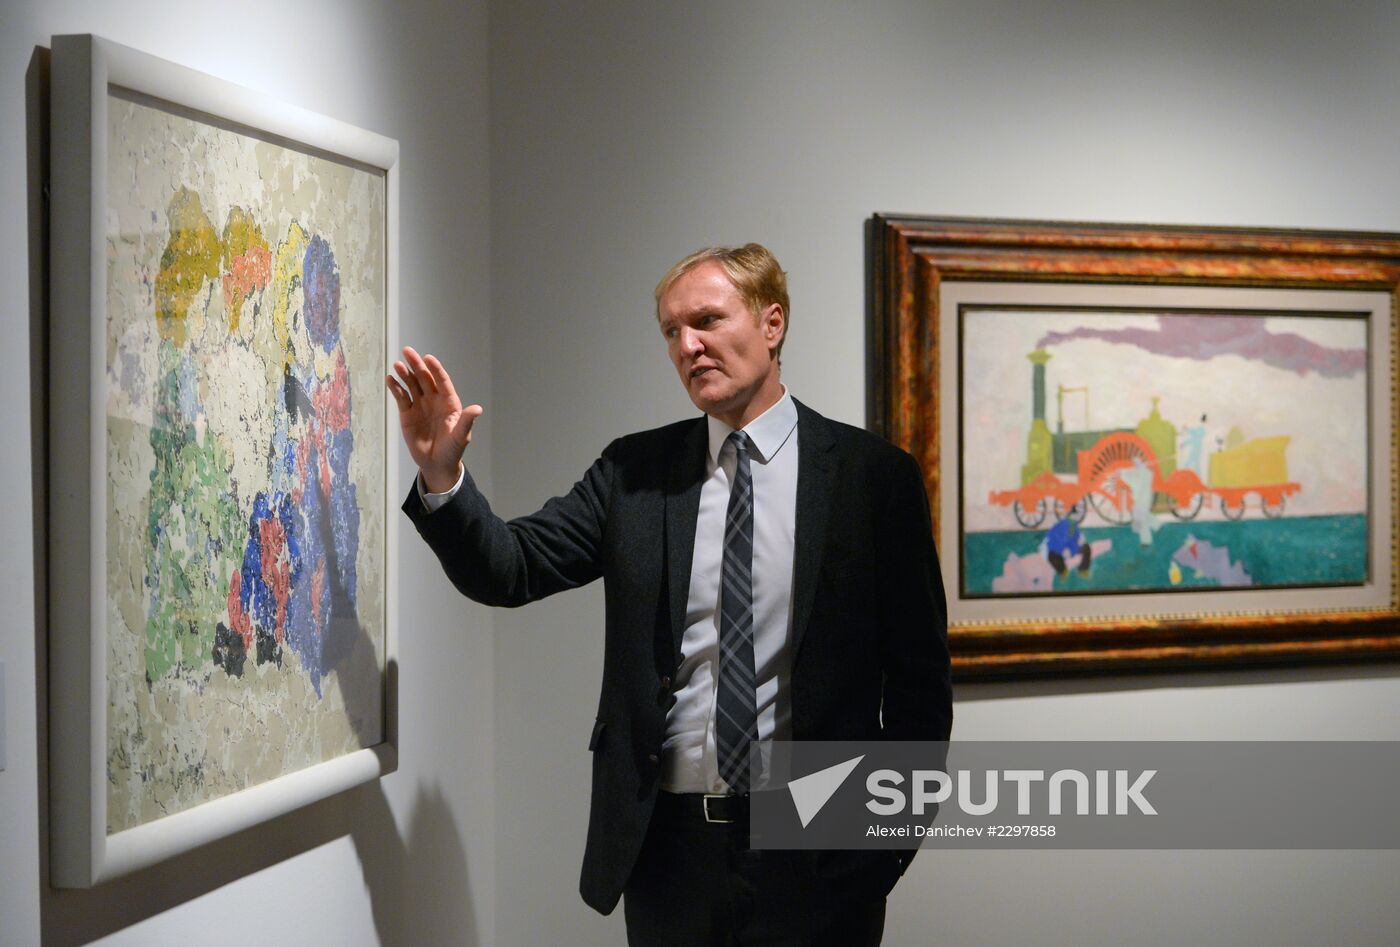 Exhibition of 20th-Century Masterpieces from Albertina Collection, St.Petersburg